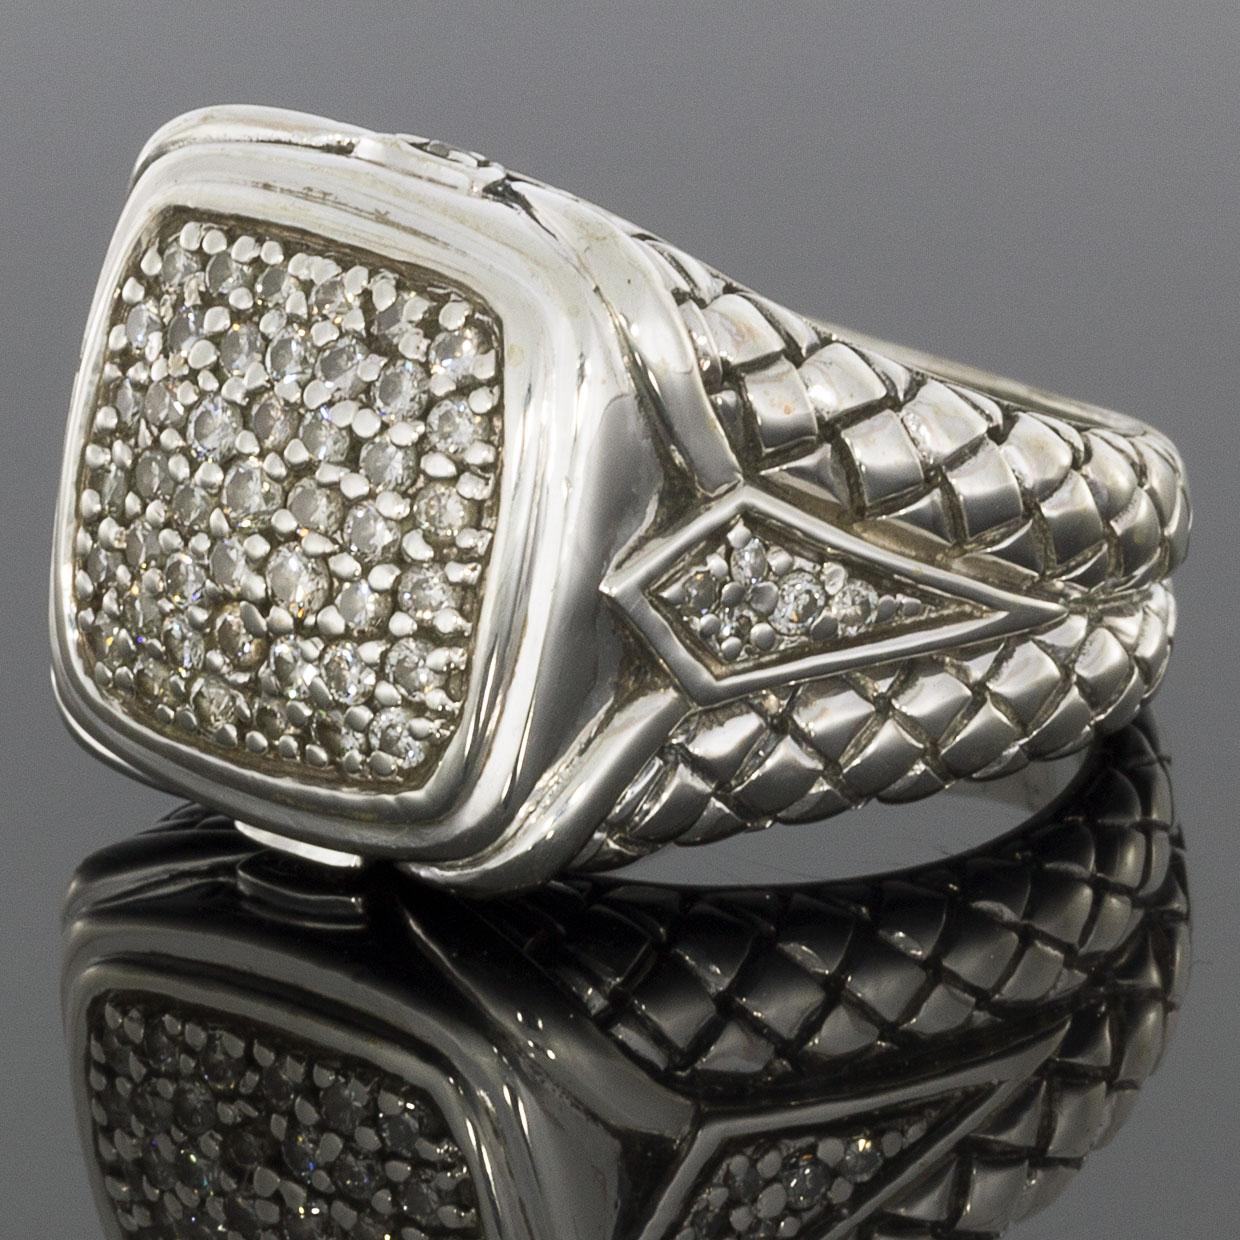 Item Details:
Estimated Retail - $2,100.00+
Brand - Scott Kay
Metal - 925 Sterling Silver
Total Carat Weight (TCW) - 0.82 ctw
Ring Size - 9.00
Sizable - Yes
Width - 17.40 mm
Style - Statement Ring

Stone 1 Information:
Stone Type - Diamond
Stone